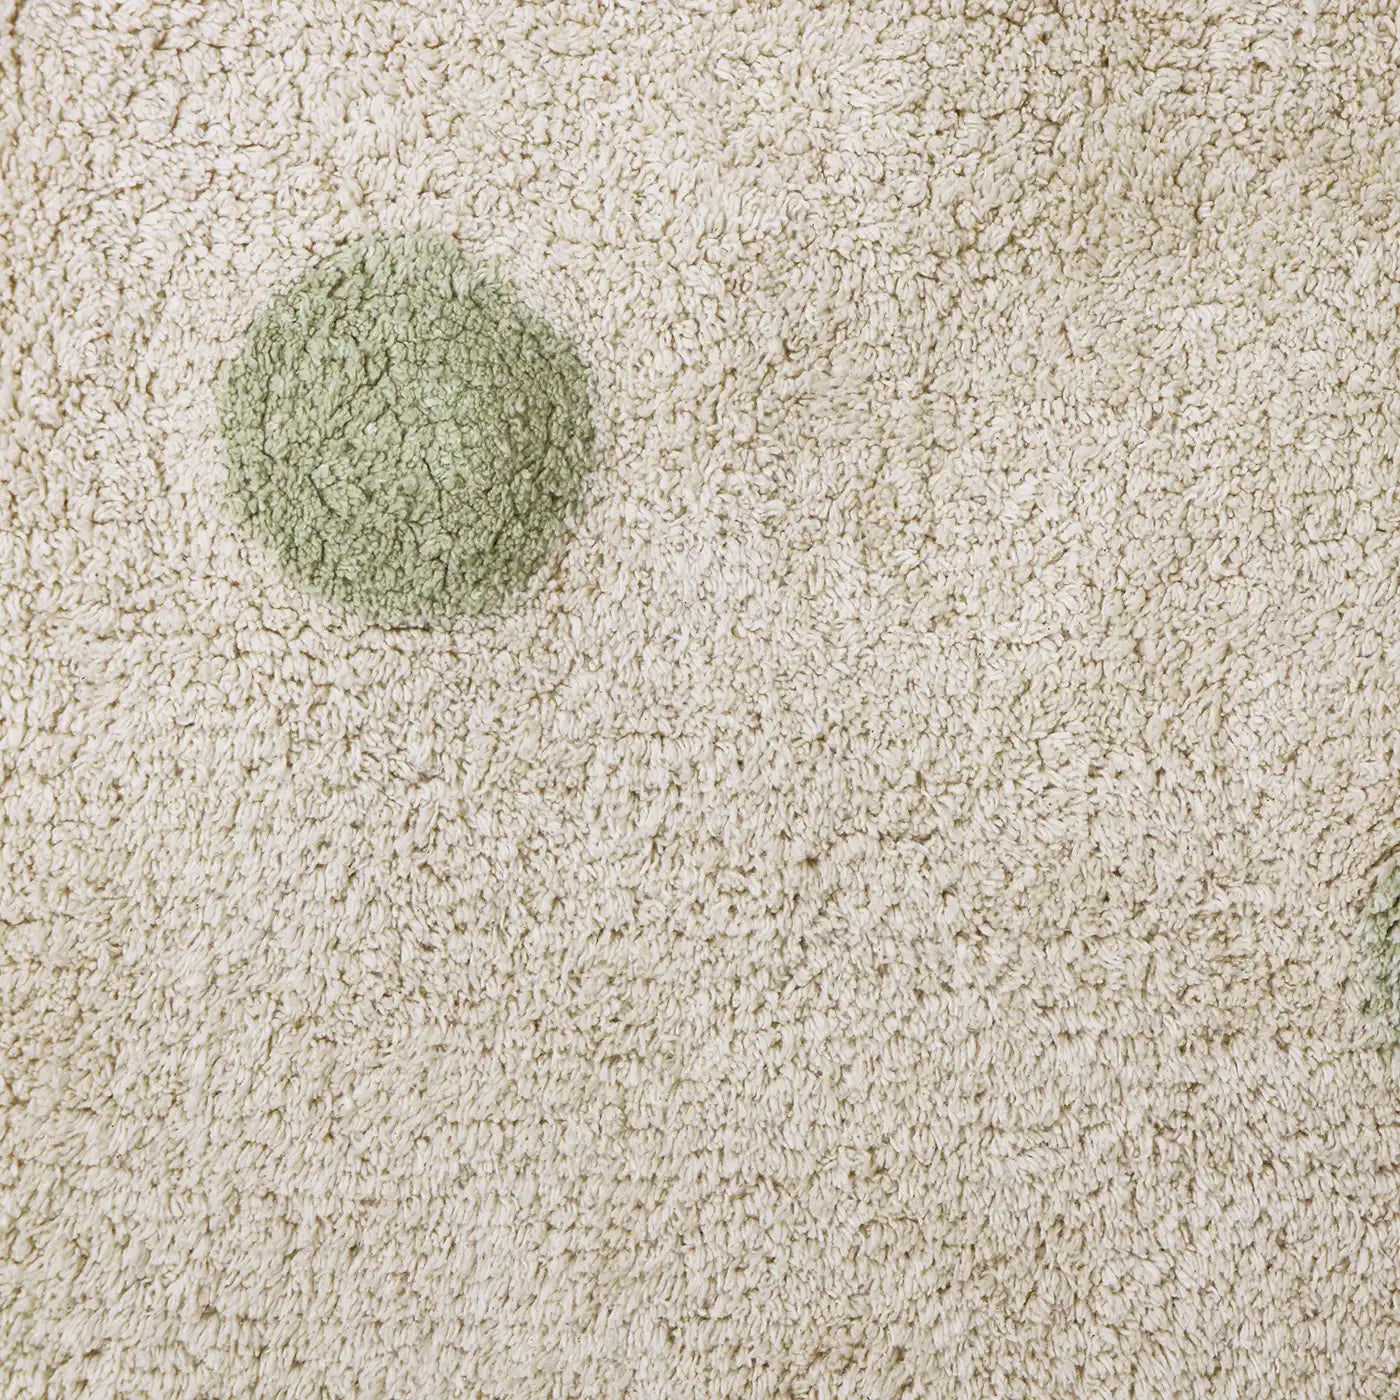 Lorena Canals Hippy Dots Washable Rug - Olive (Re Edition + Polka Dots Collection)